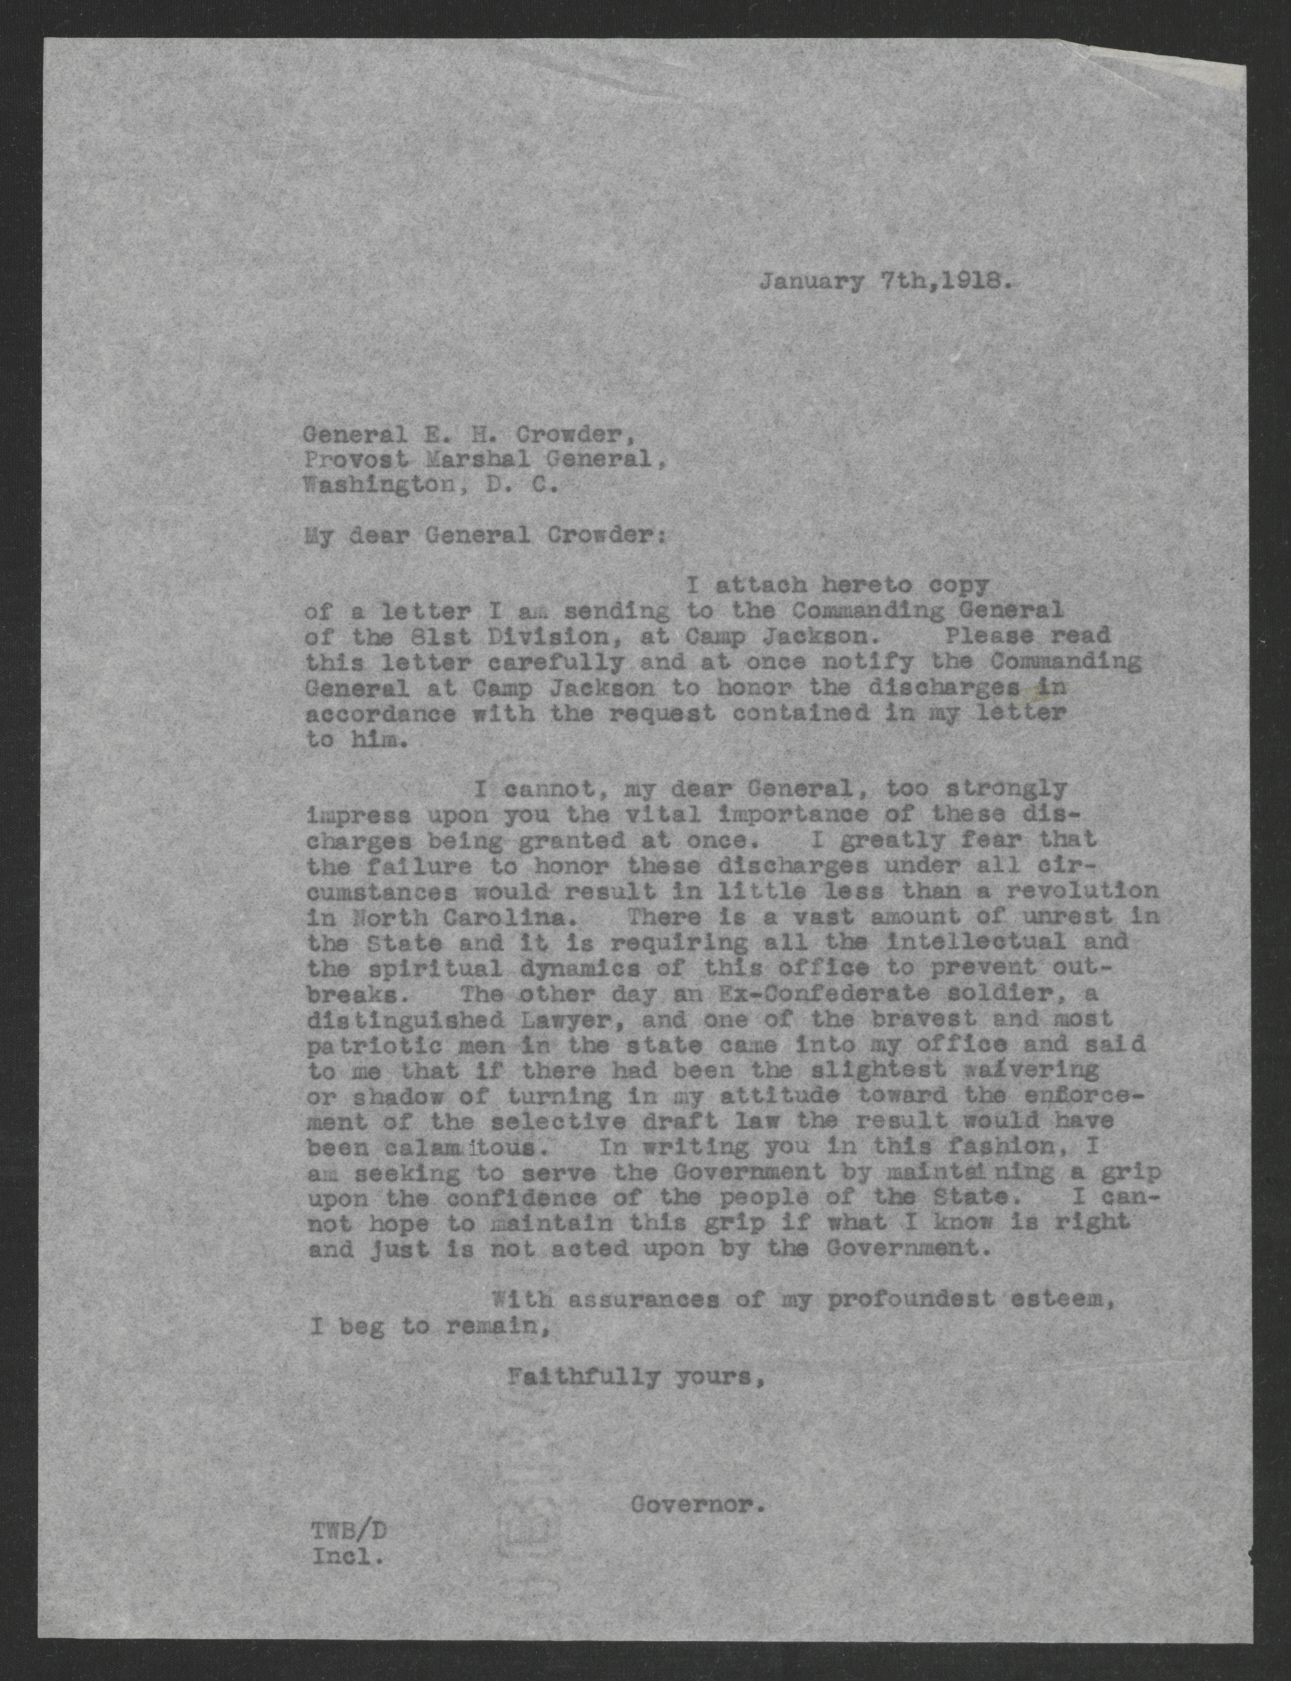 Letter from Thomas W. Bickett to Enoch H. Crowder, January 7, 1918